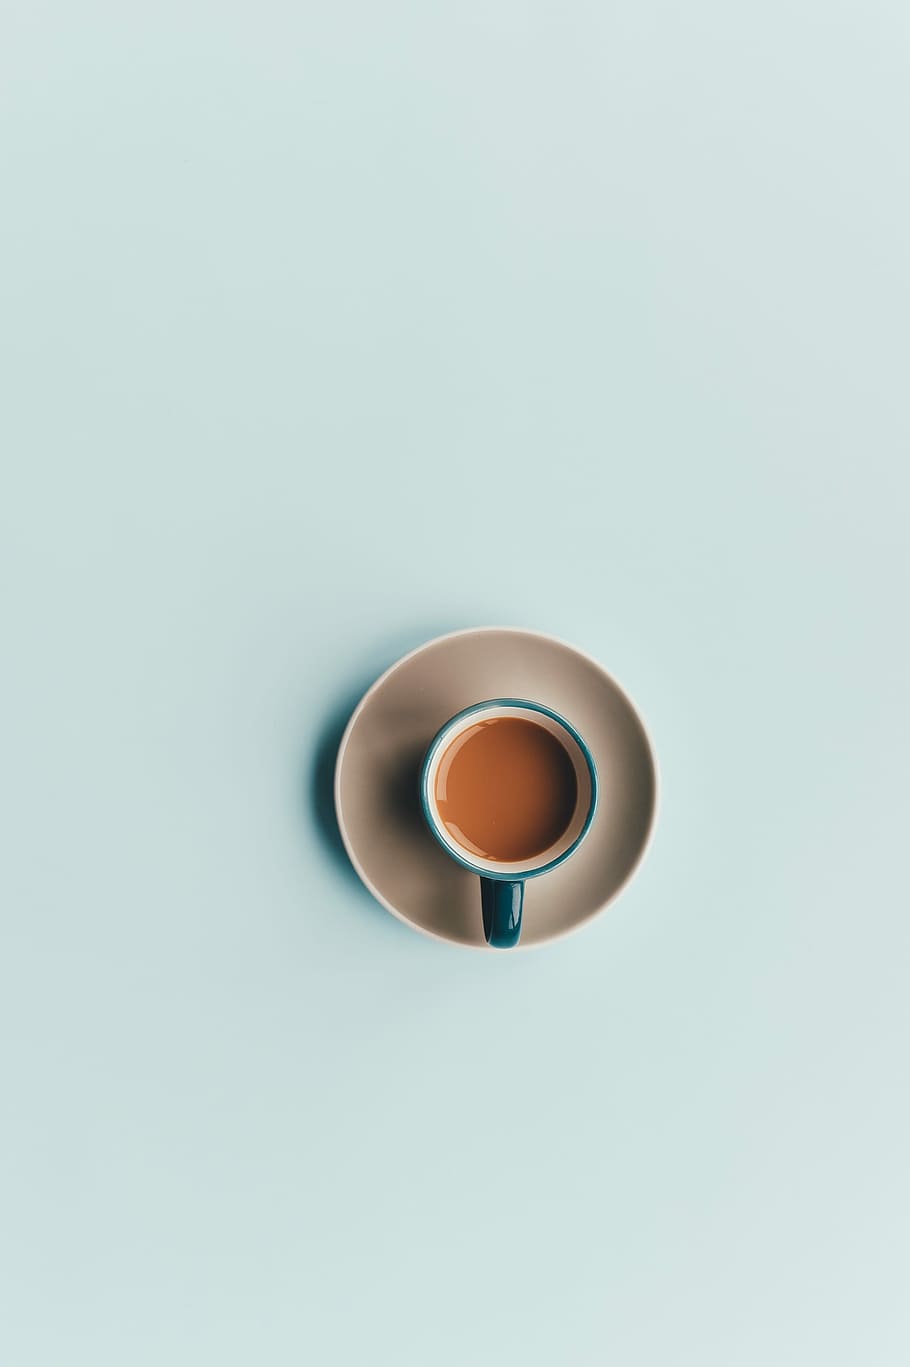 plain, minimalistic coffee, Plain, minimalistic, coffee, brown, crema, cup, simplistic, white, coffee - Drink